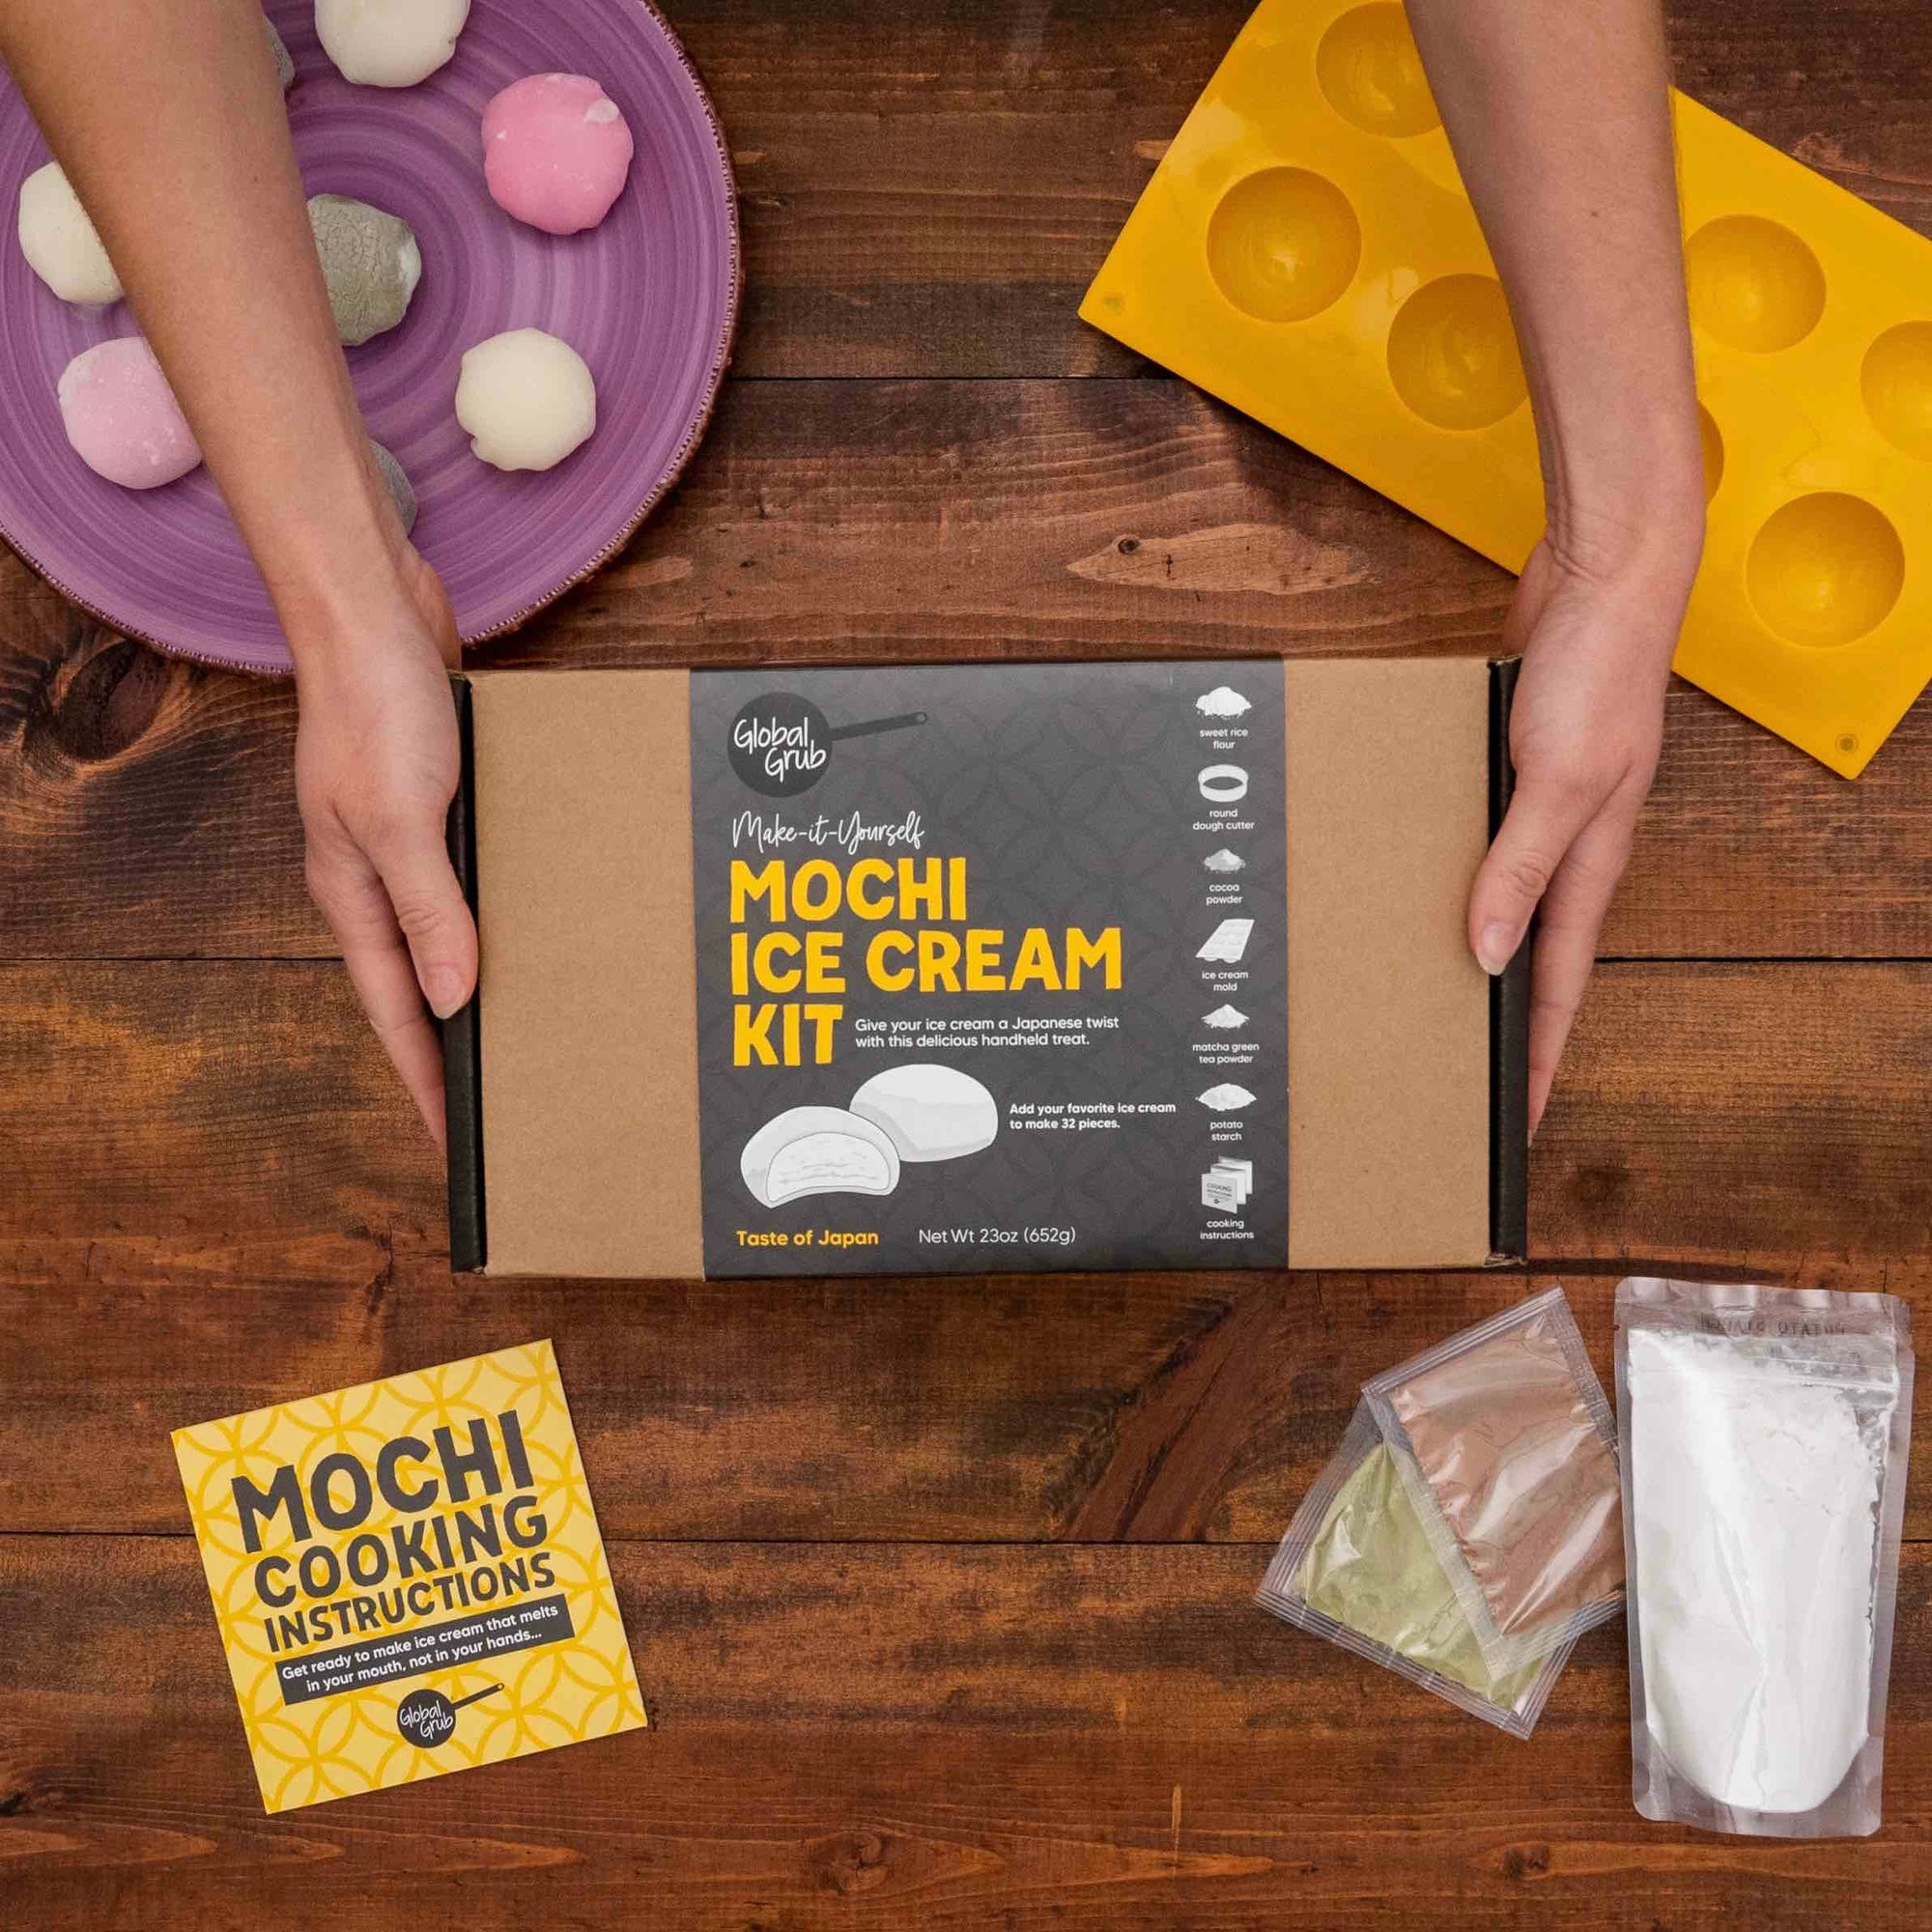 Making mochi ice cream is easy with this simple DIY kit